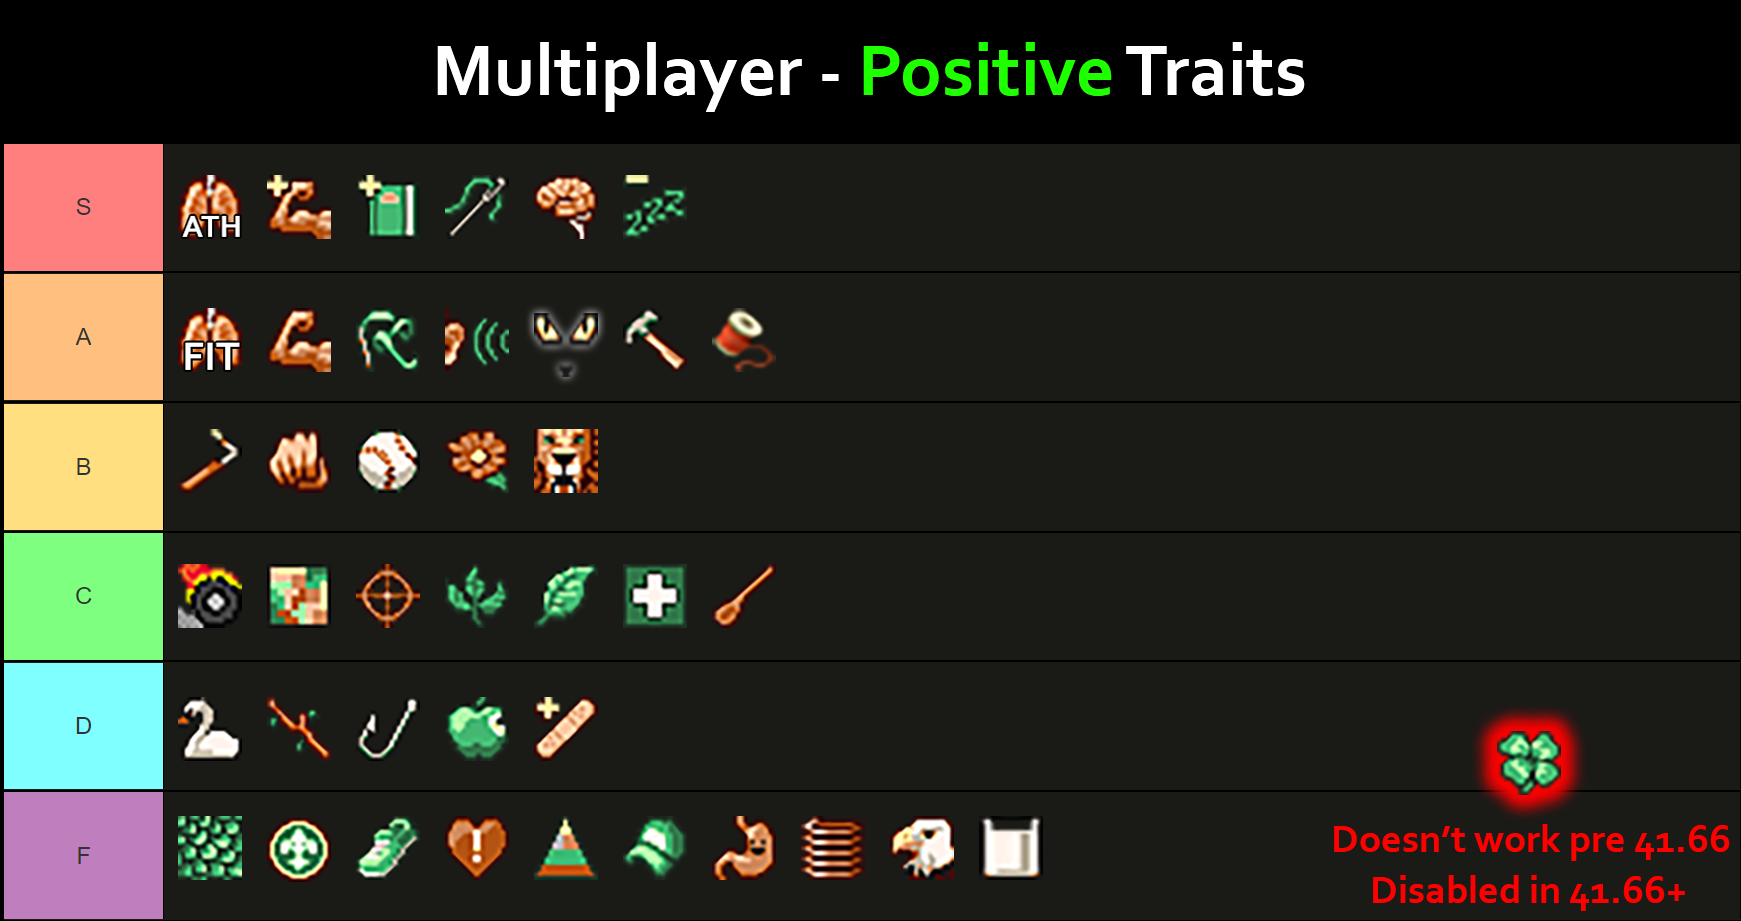 Project Zomboid Traits and Occupations Tier List - Multiplayer - Positive Traits - tzjp